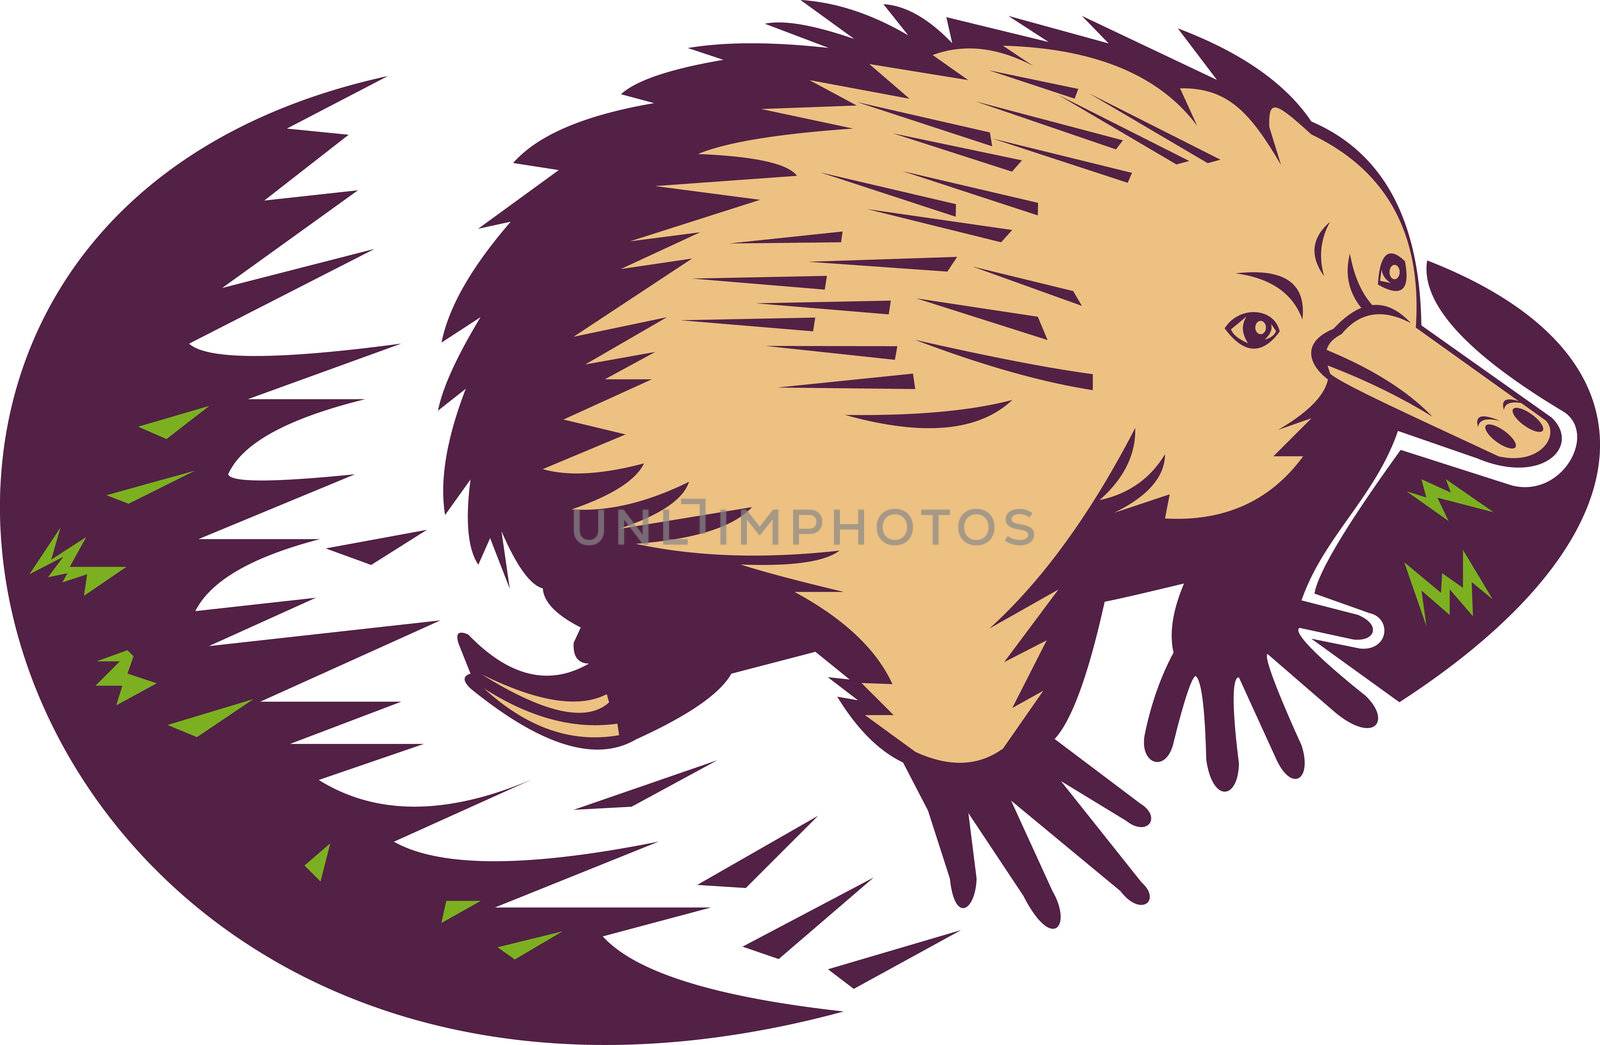 illustration of a spiny anteater or echidna